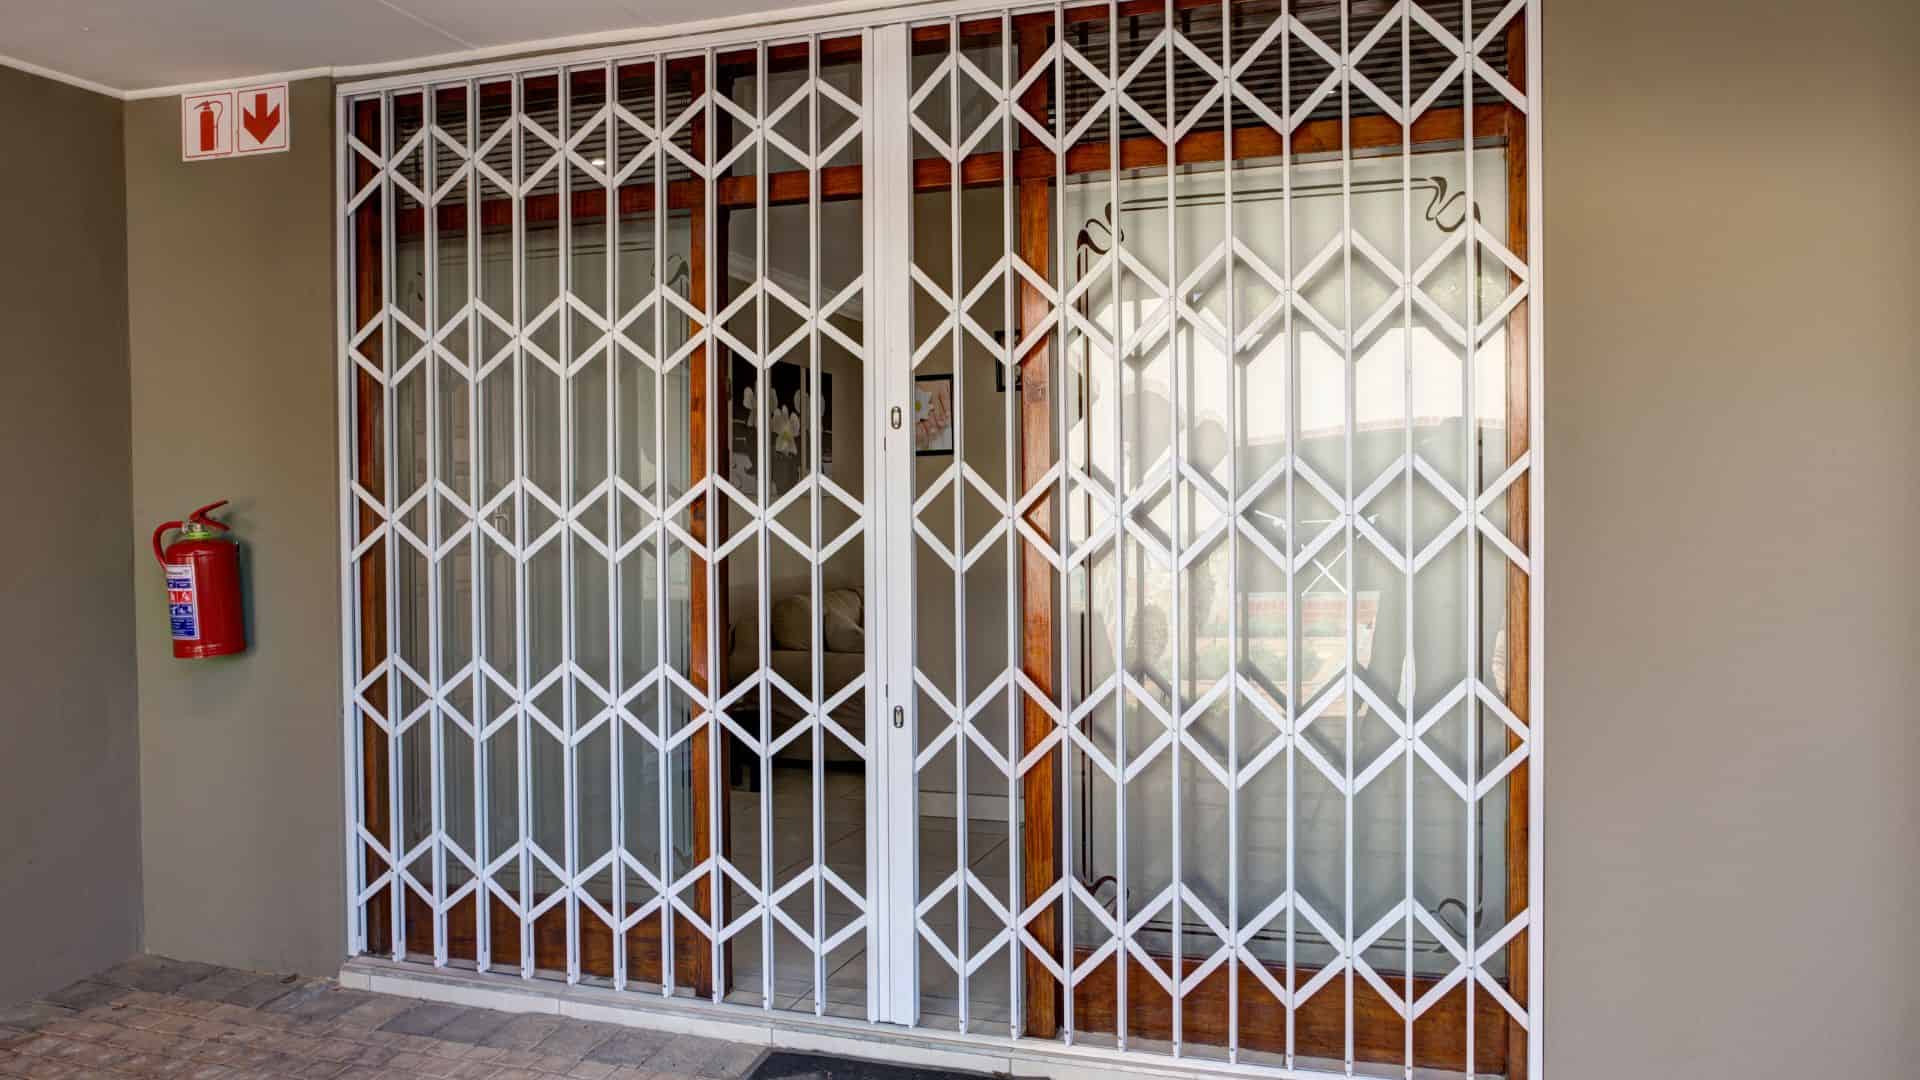 10 Best Security Gate Designs For Your Home With Images